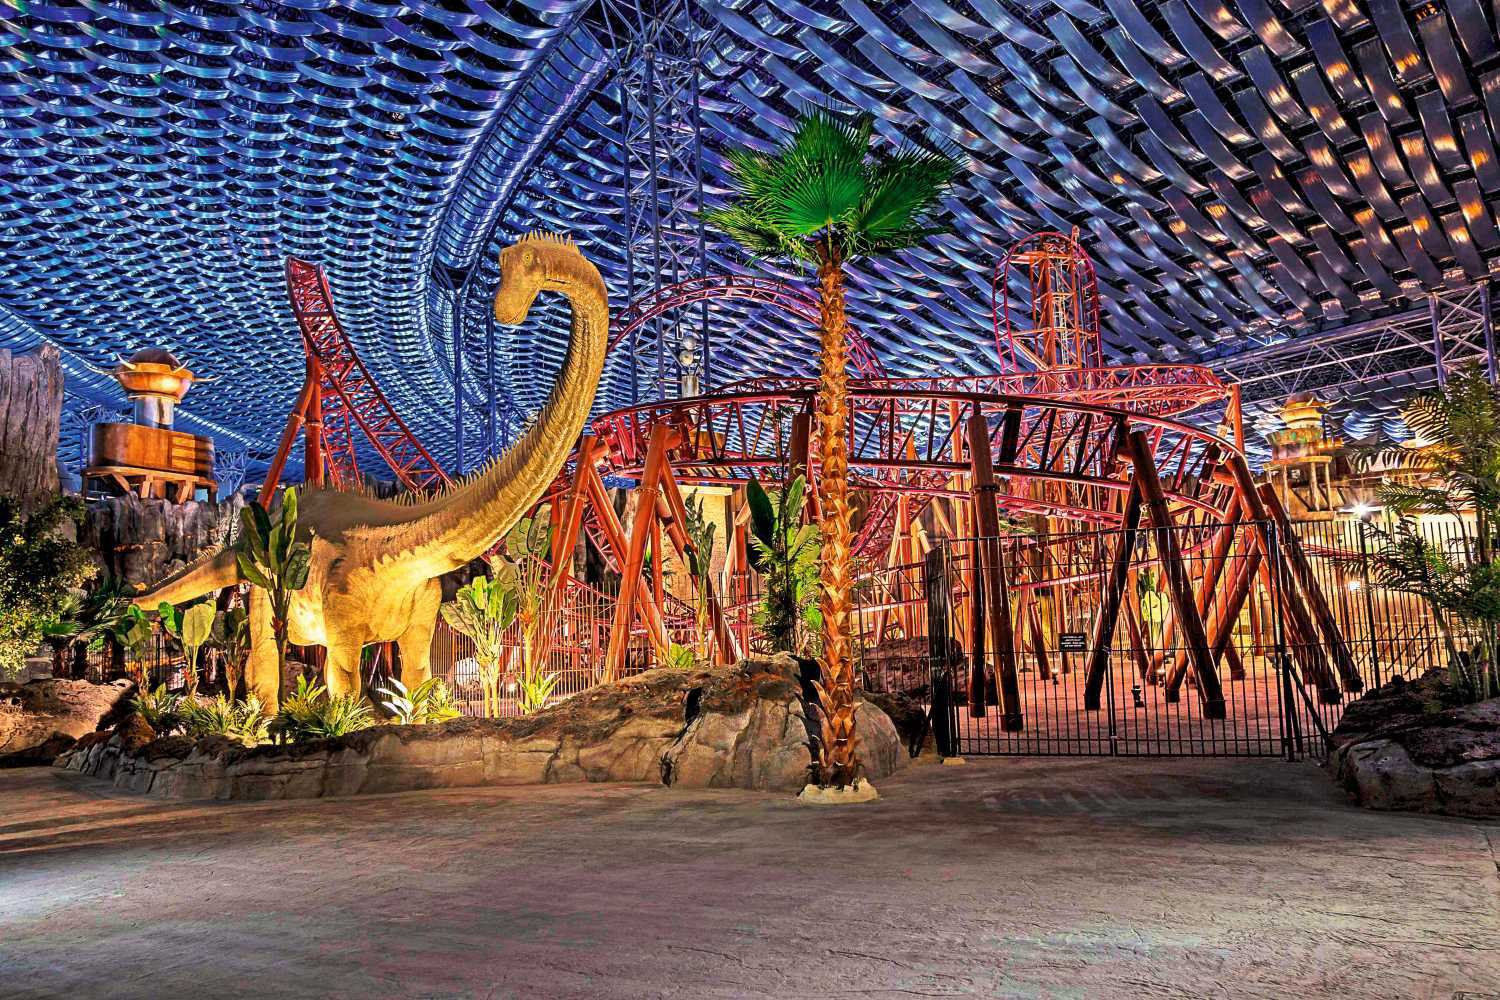 IMG Worlds of Adventure in Dubai | Reviews | Places to Visit | Things To Do | Time Out Dubai